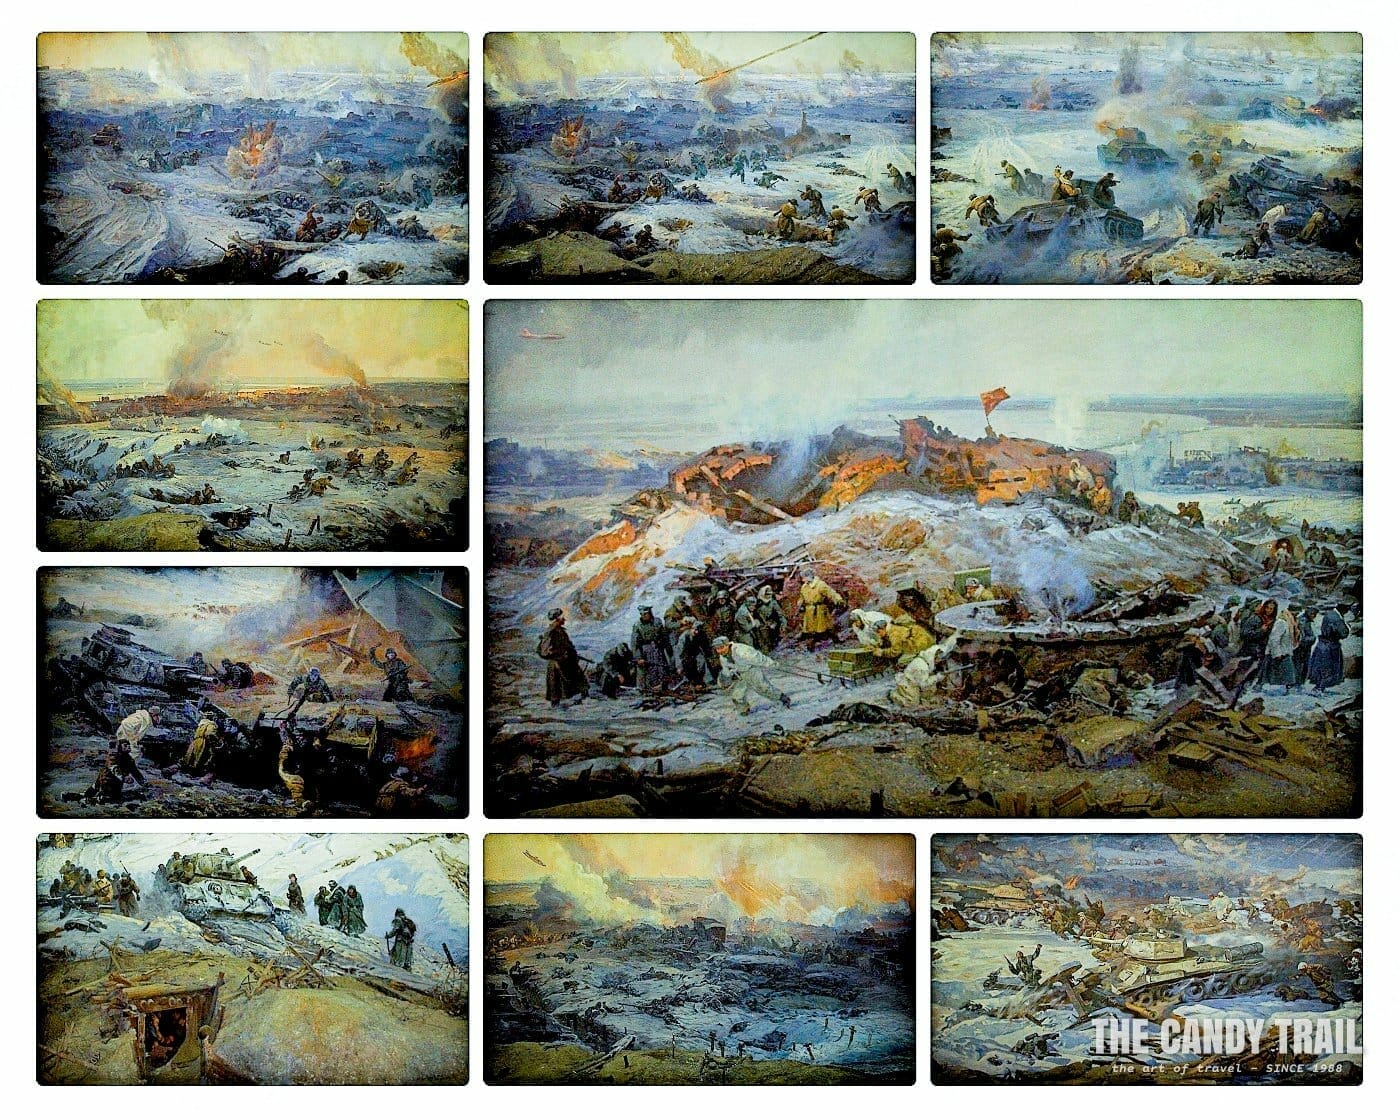 Stalingrad Museum: Intense battle scenes painted in a 360-degree panorama of Battle of Stalingrad as seen from Hill 101.